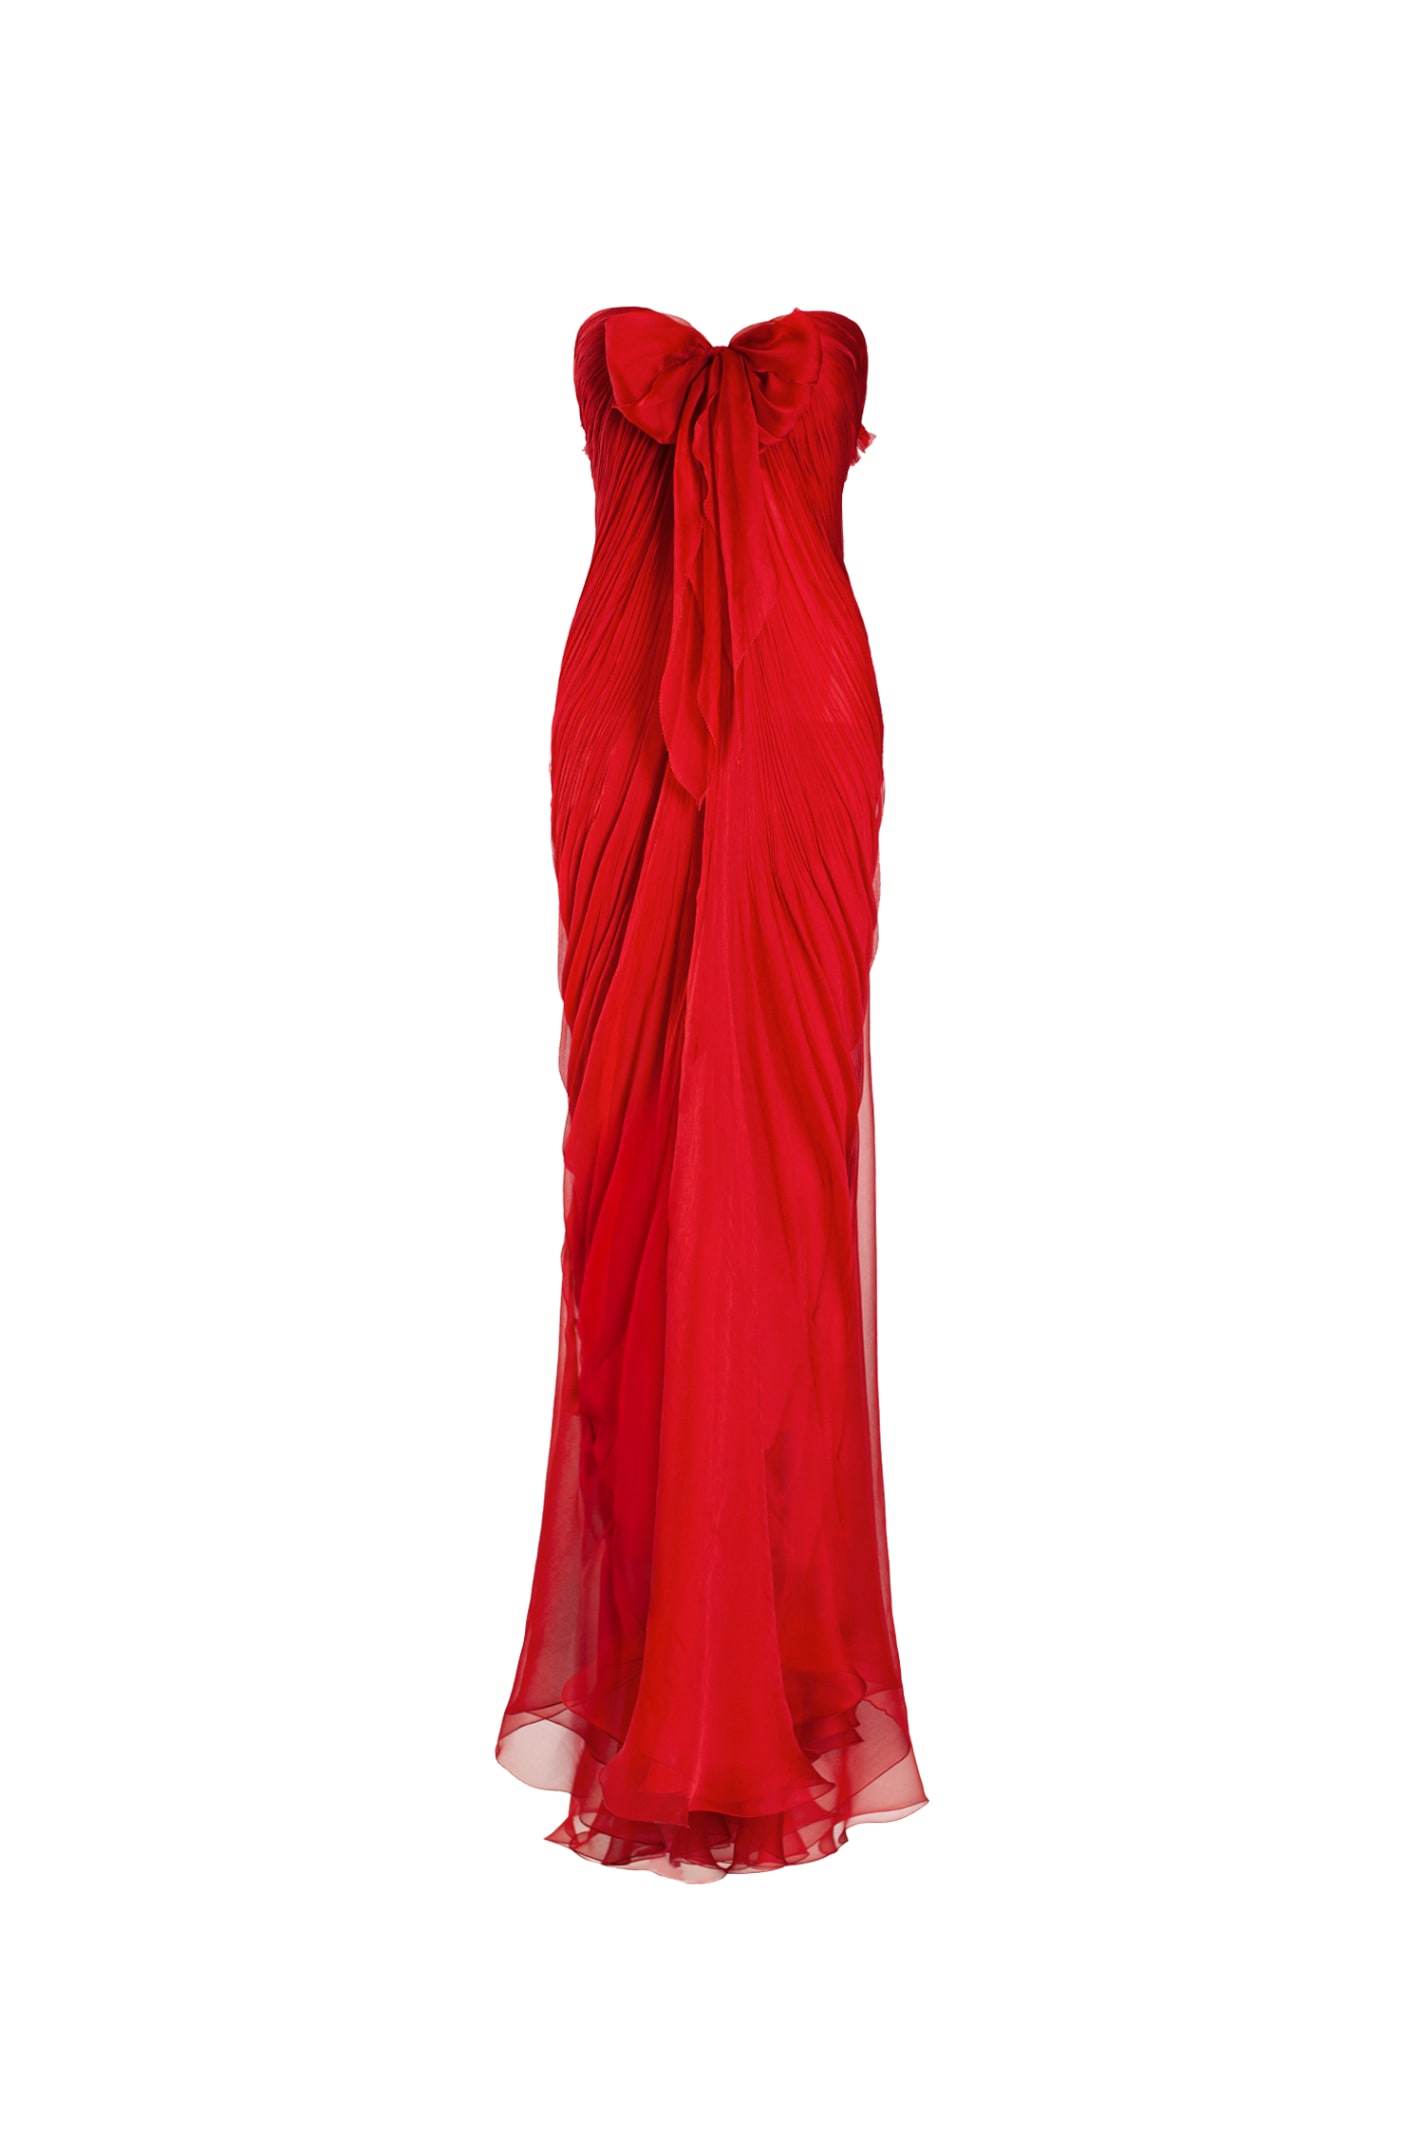 Maria Lucia Hohan Lyna Dress In Red